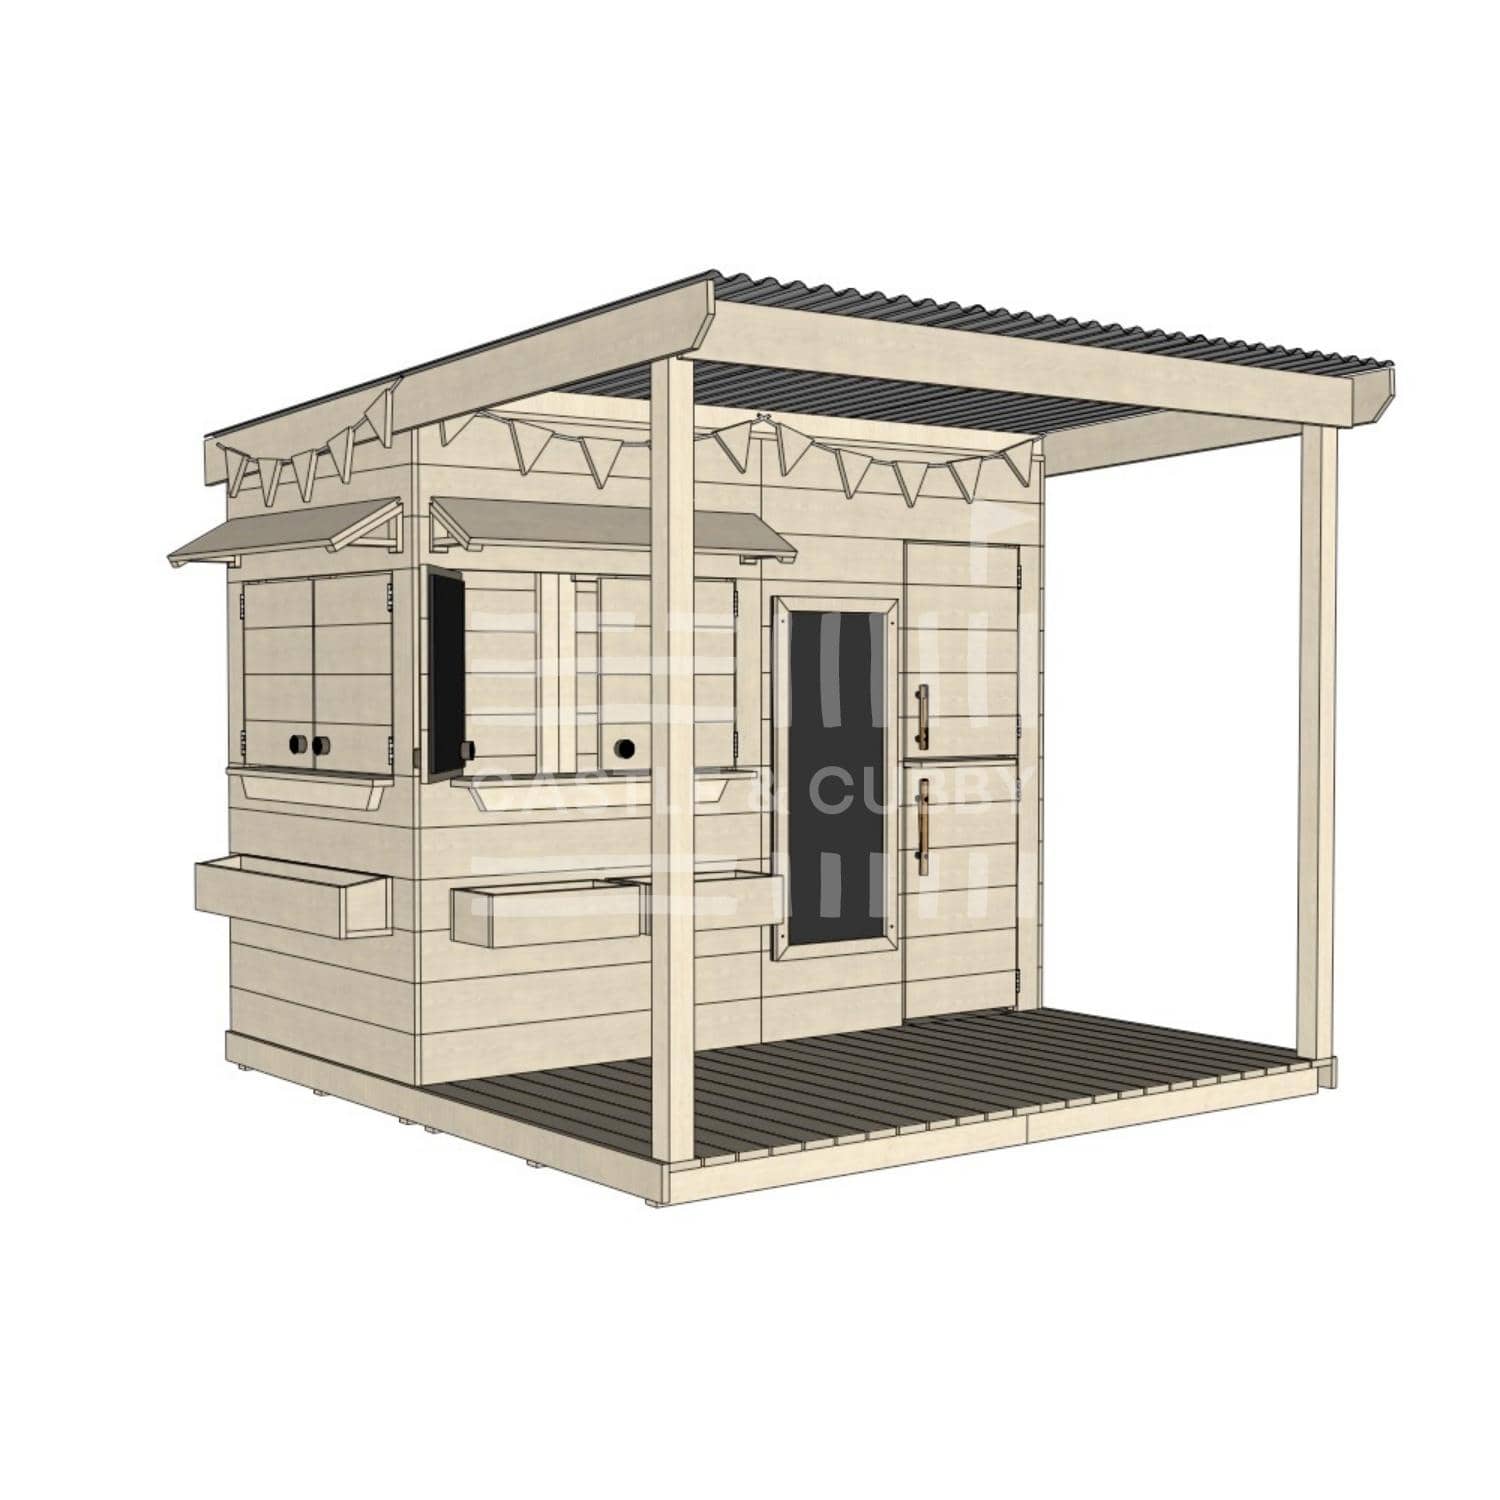 Pine timber extended height cubby house with front verandah and deck for family gardens midi rectangle size with accessories